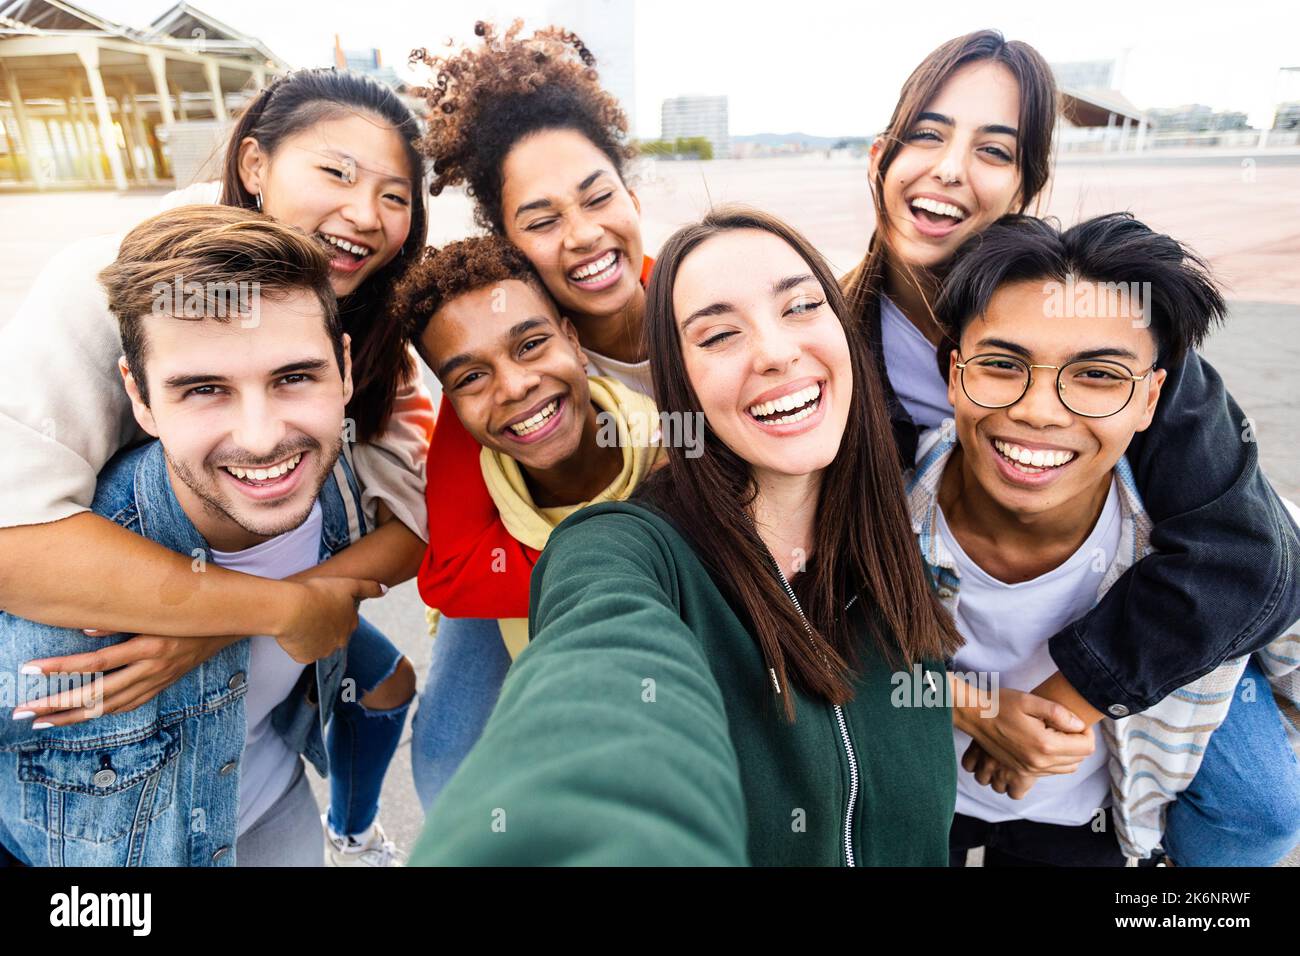 Funny young group of multiethnic friends taking self portrait together outdoors Stock Photo